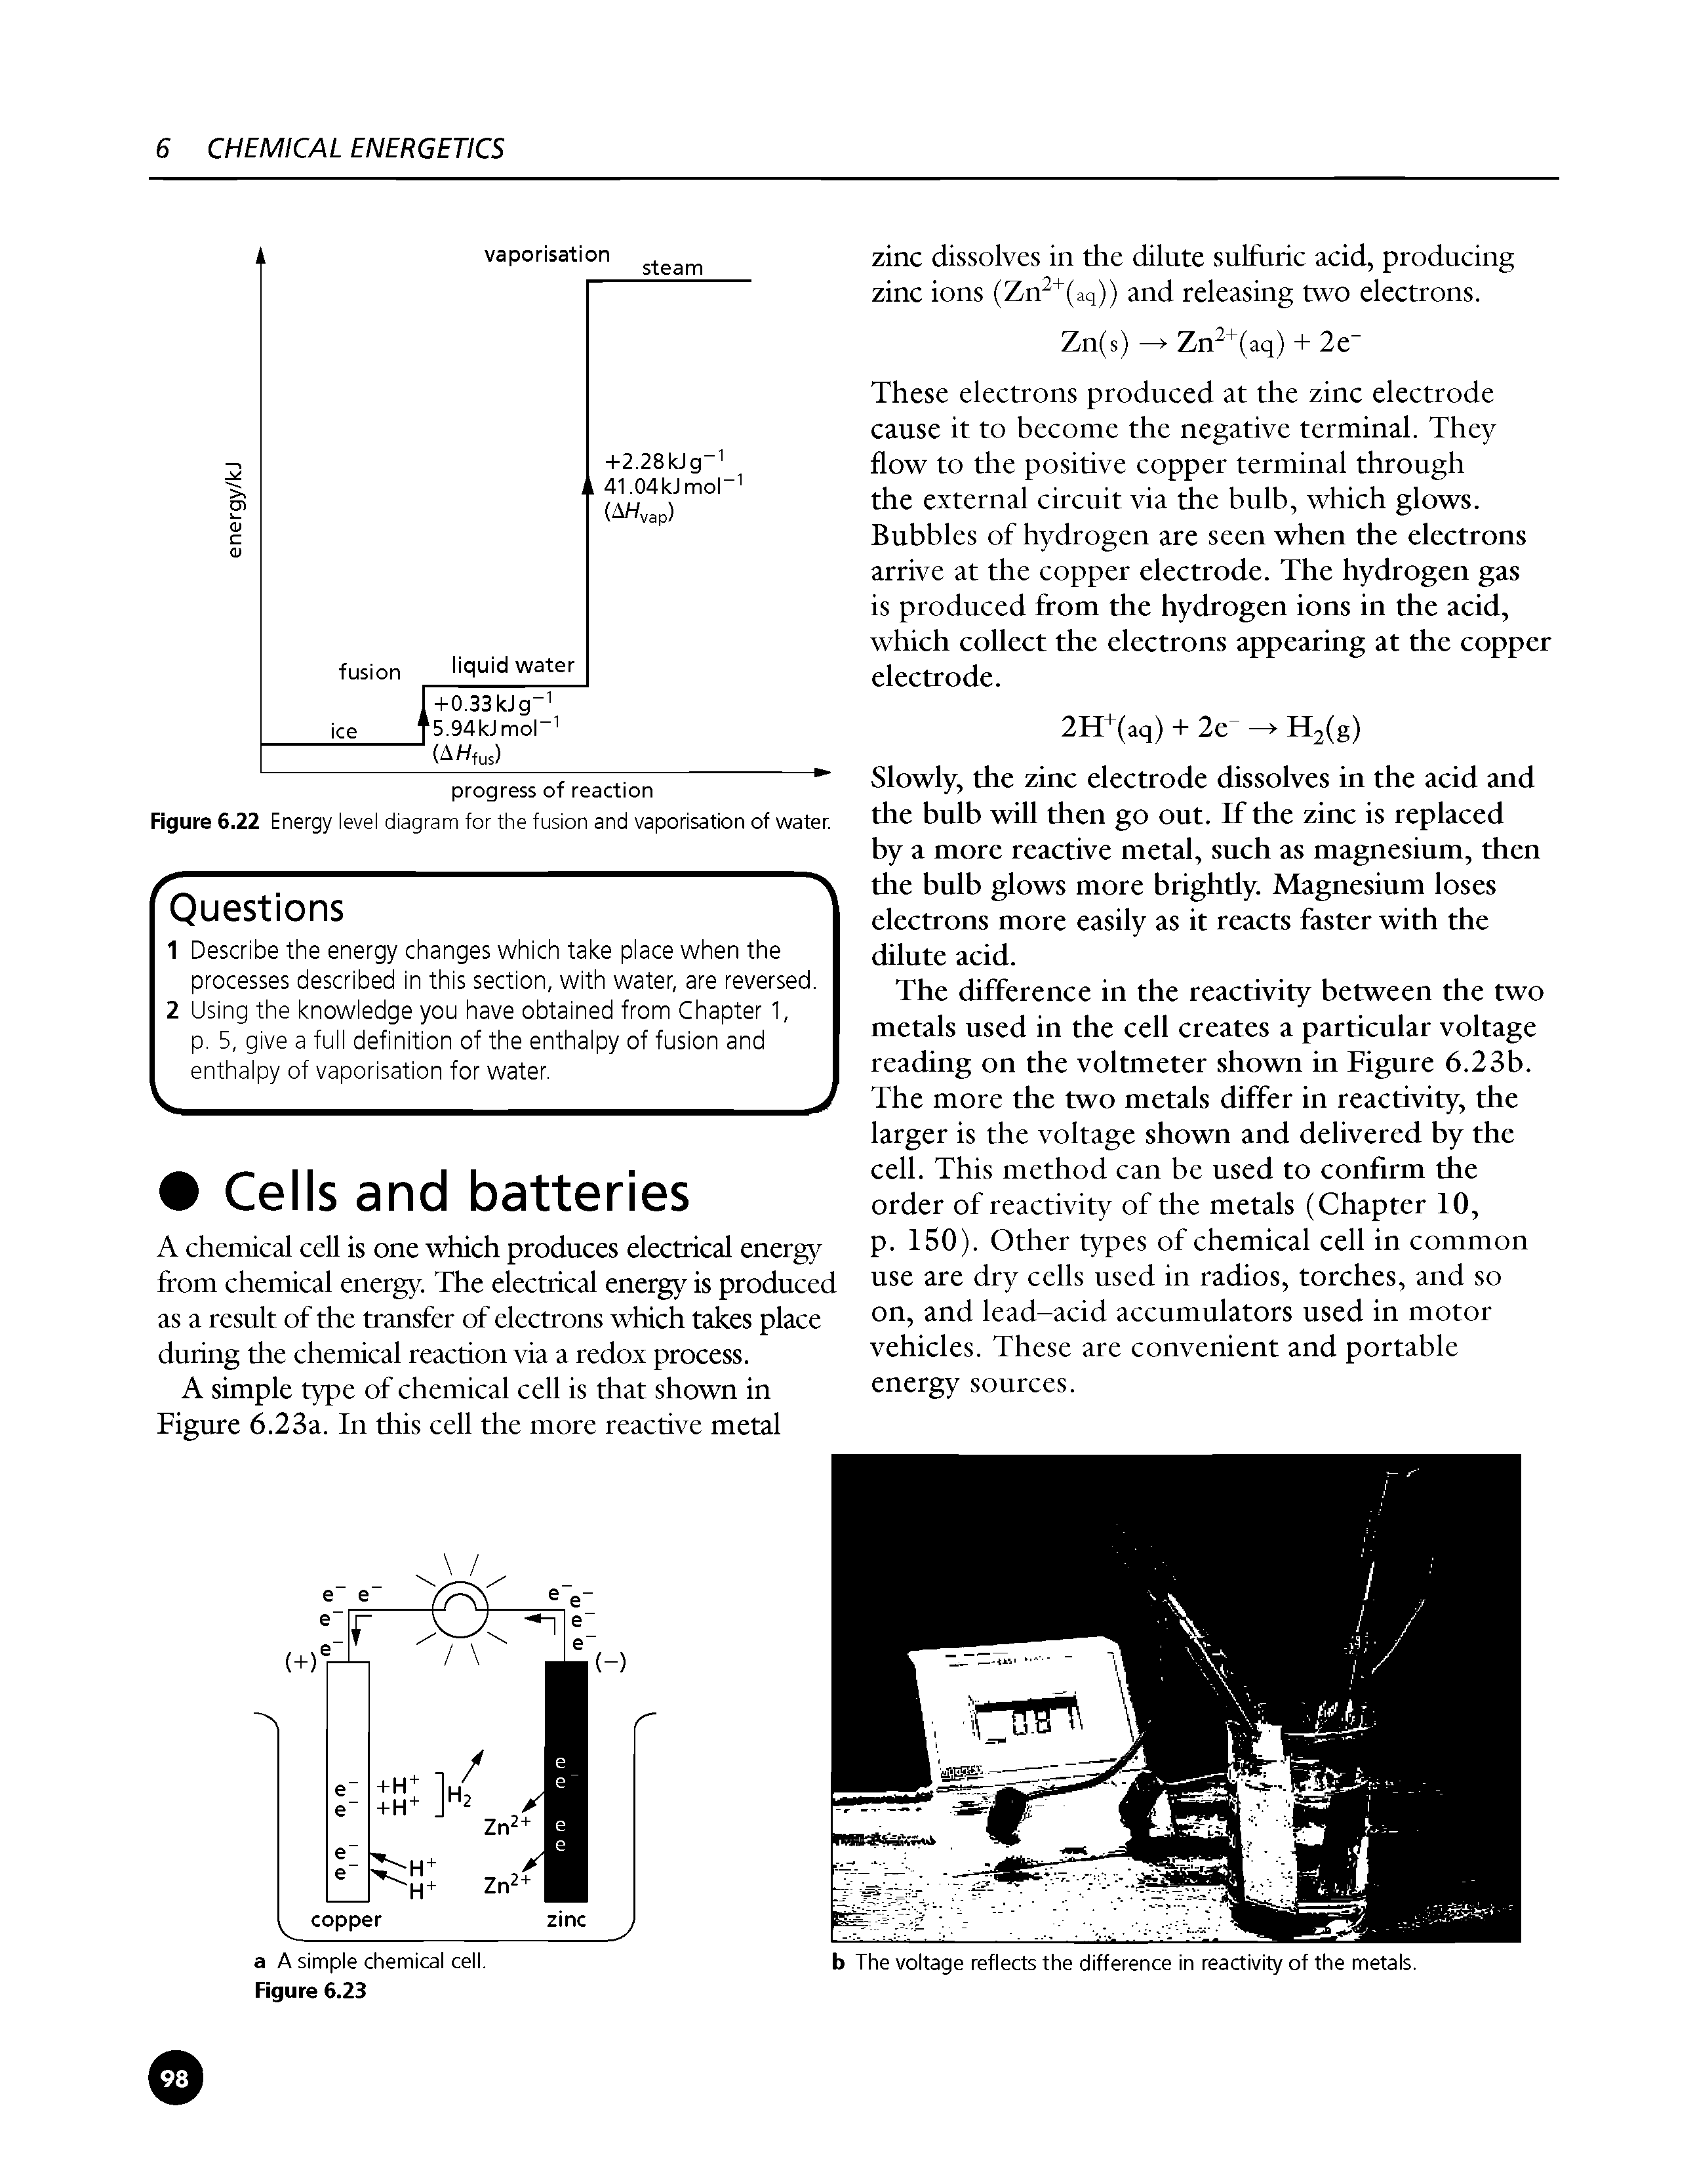 Figure 6.22 Energy level diagram for the fusion and vaporisation of water.